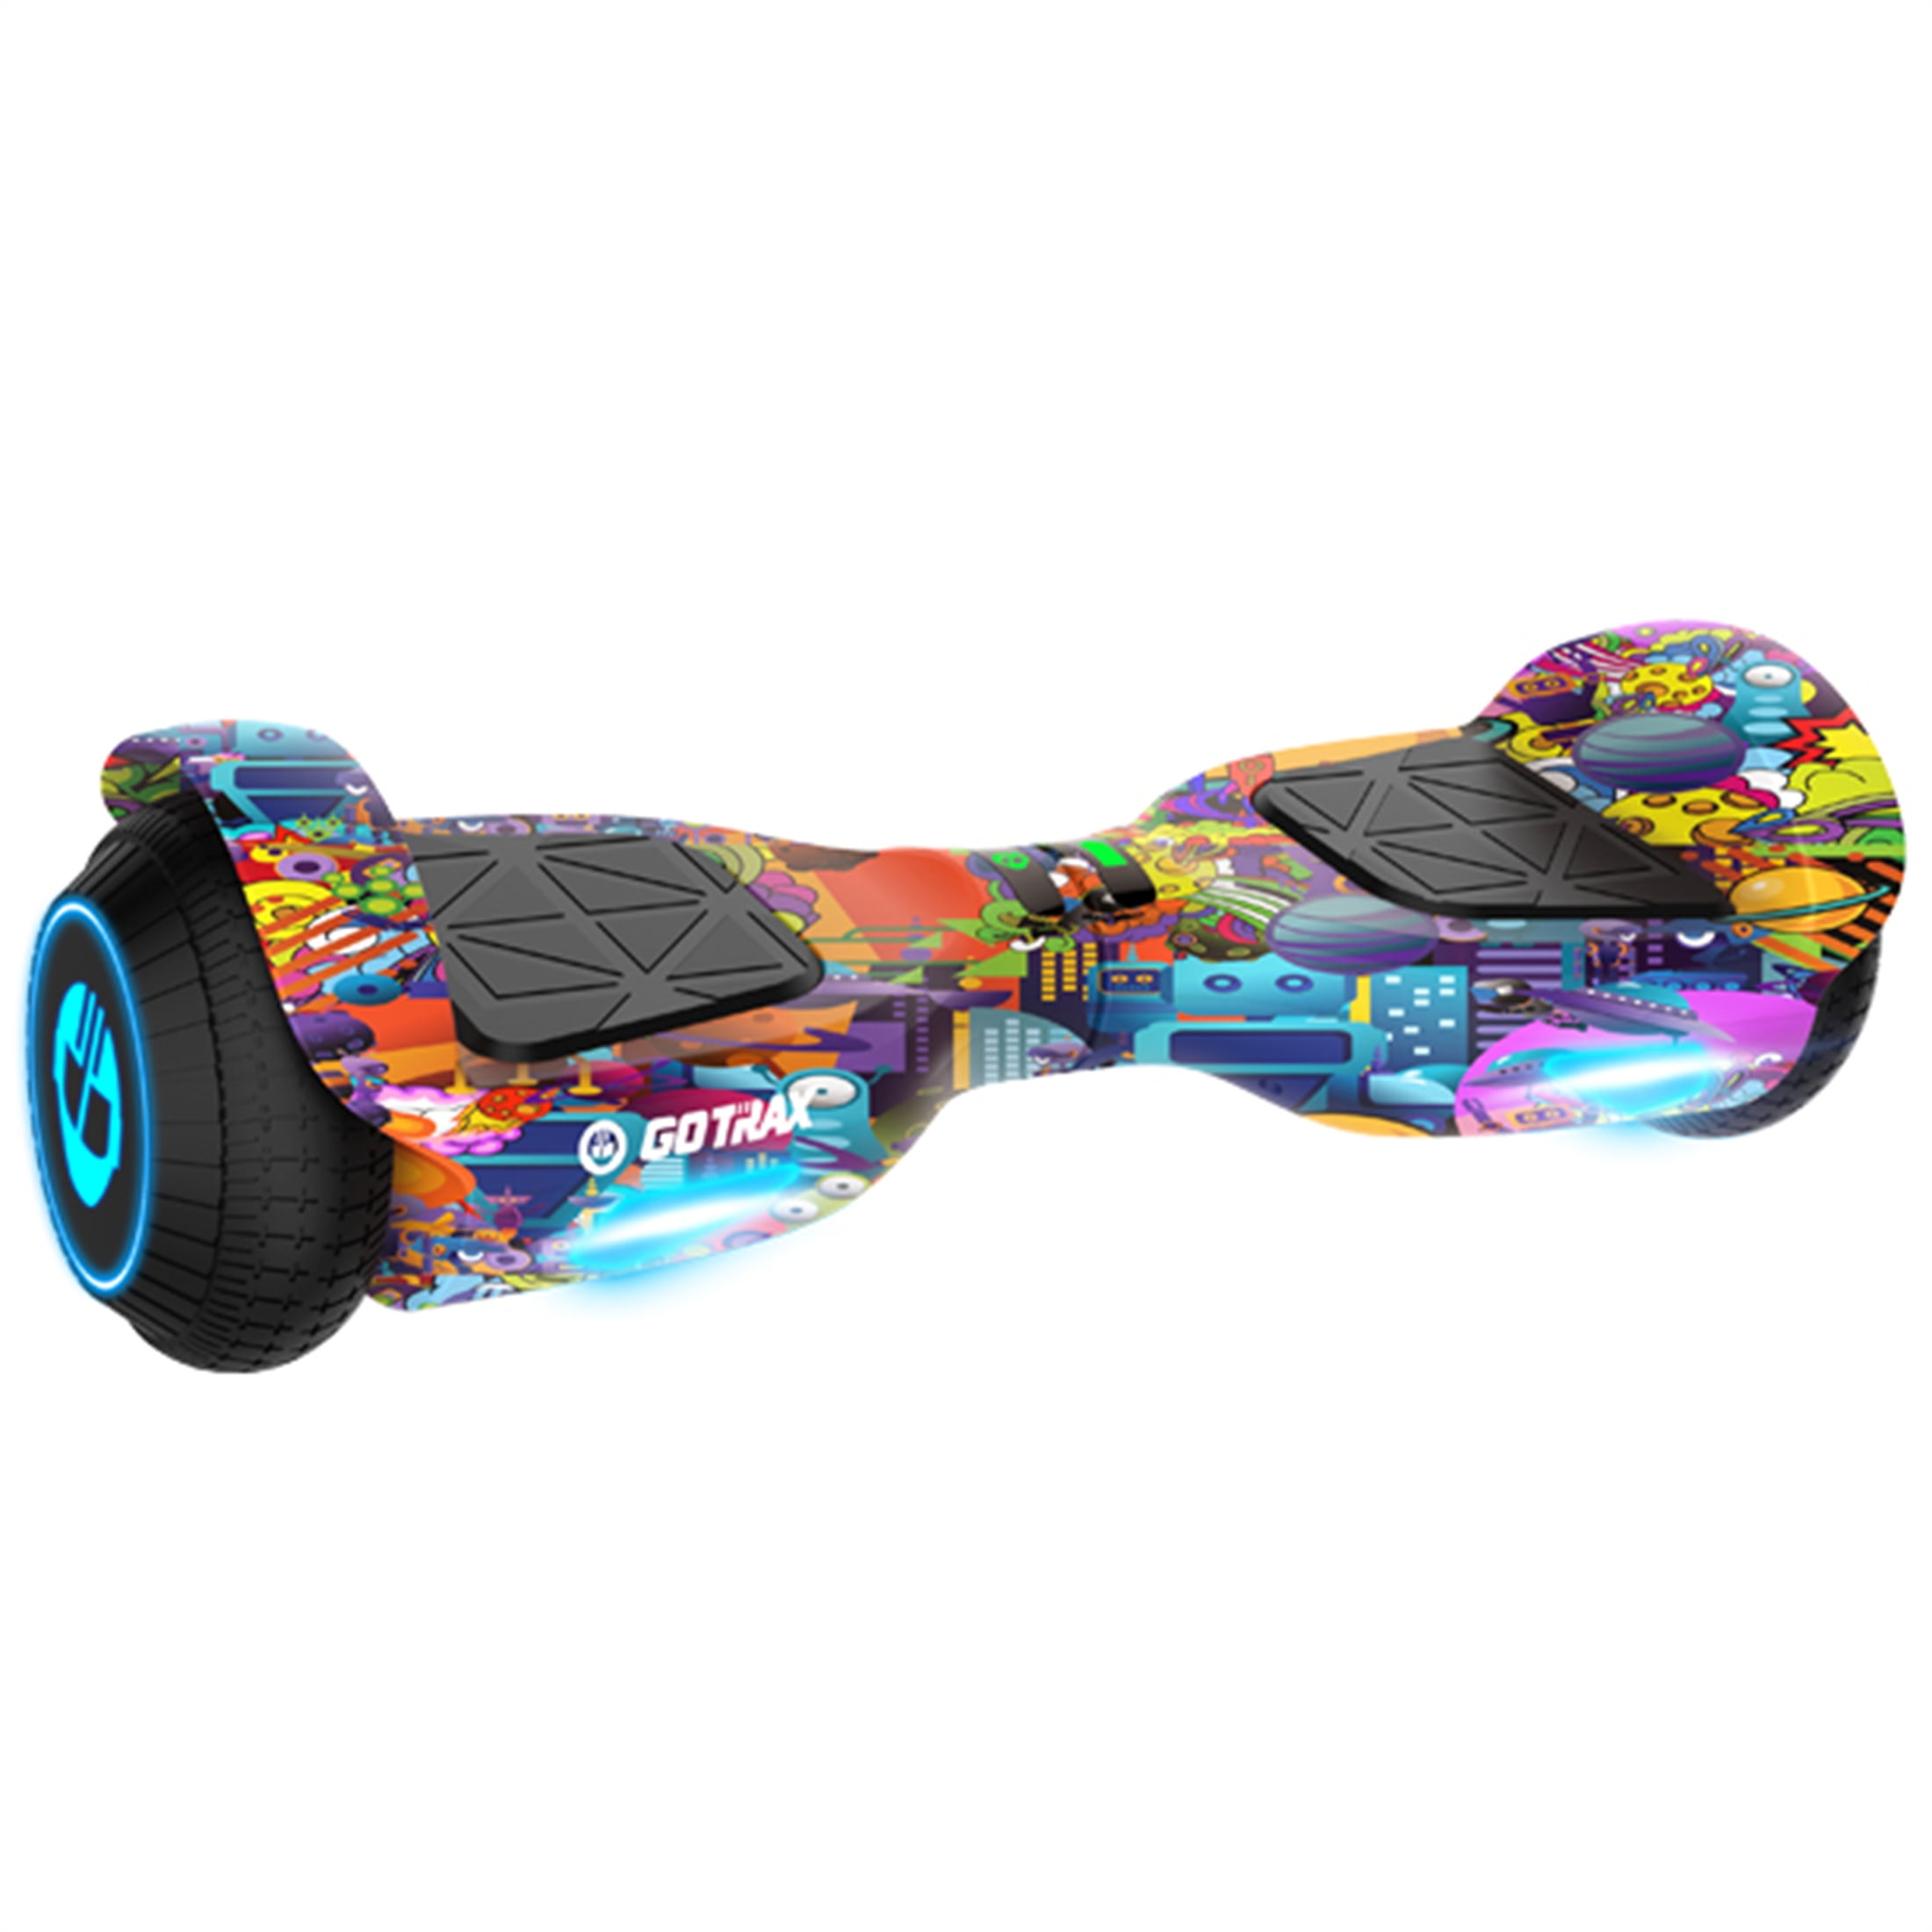 Gotrax Edge Hoverboard for Kids Adults, Top 6.2mph & 2.5 Miles Max Distance, 6.5 inch Max Load 175 lbs Self Balancing Scooter, Galaxy